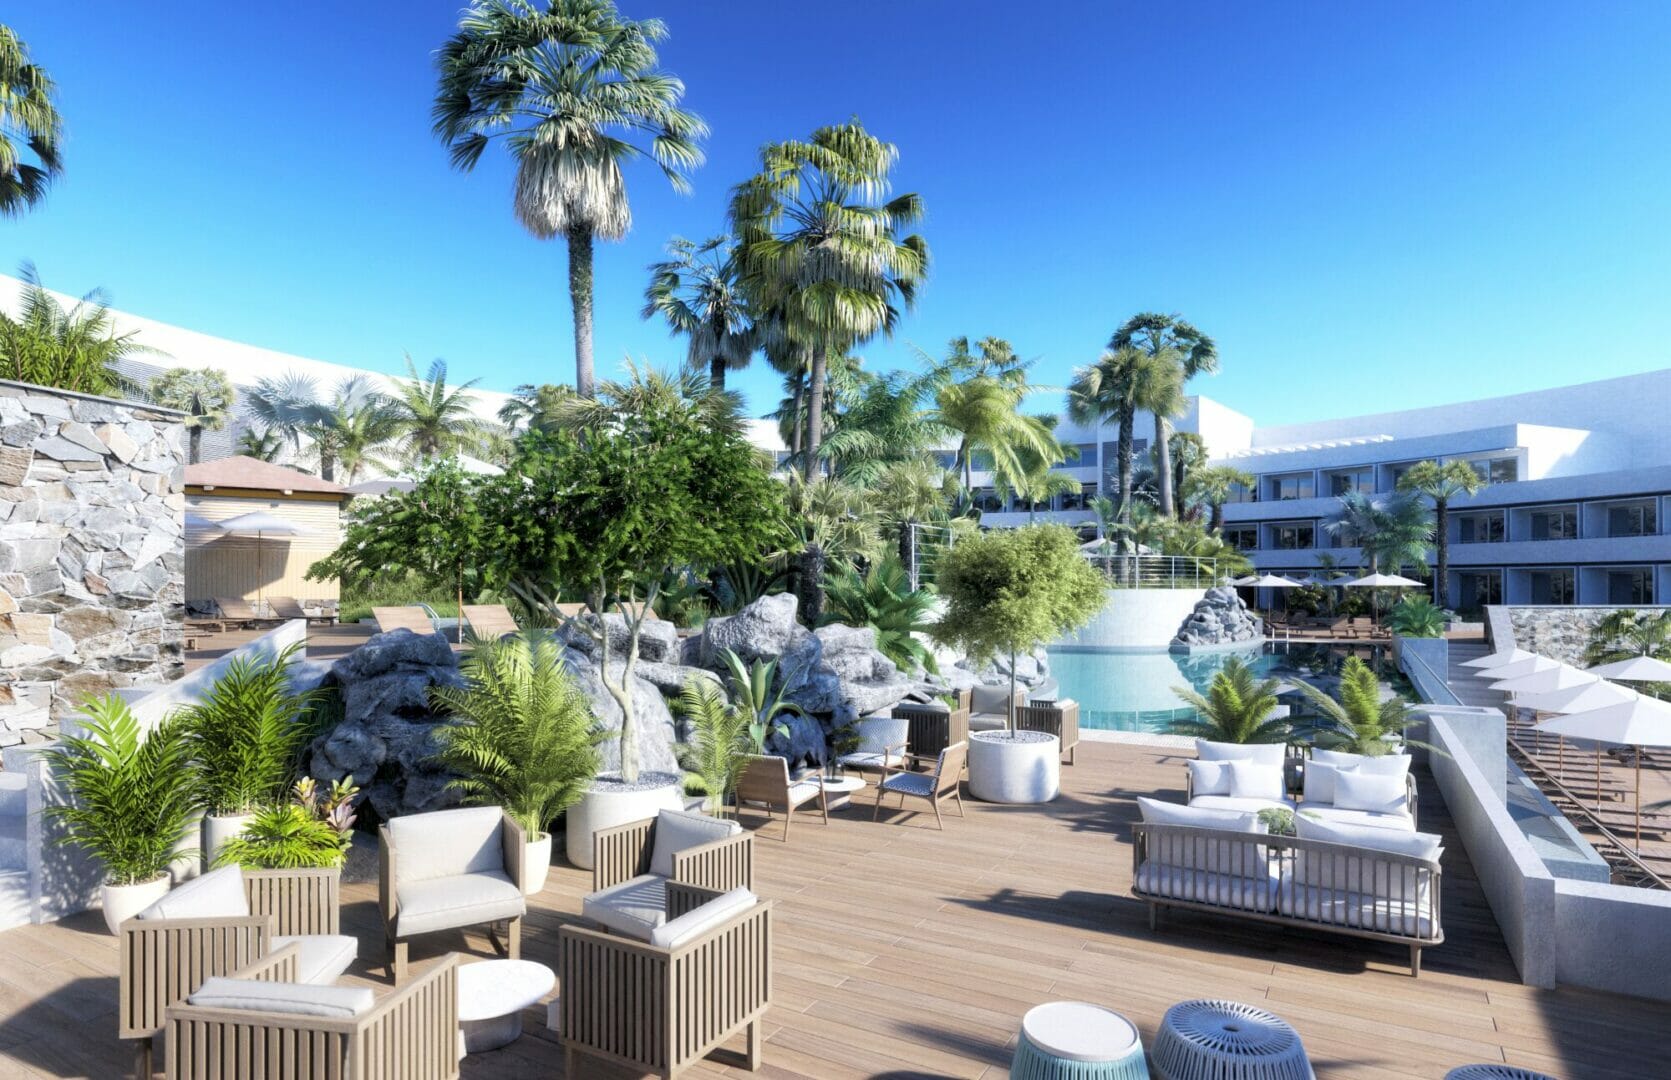 Dolce by Wyndham Sitges Barcelona unveils its new spa, bar, restaurants, rooms and suites following a €15 million investment @dolcesitges